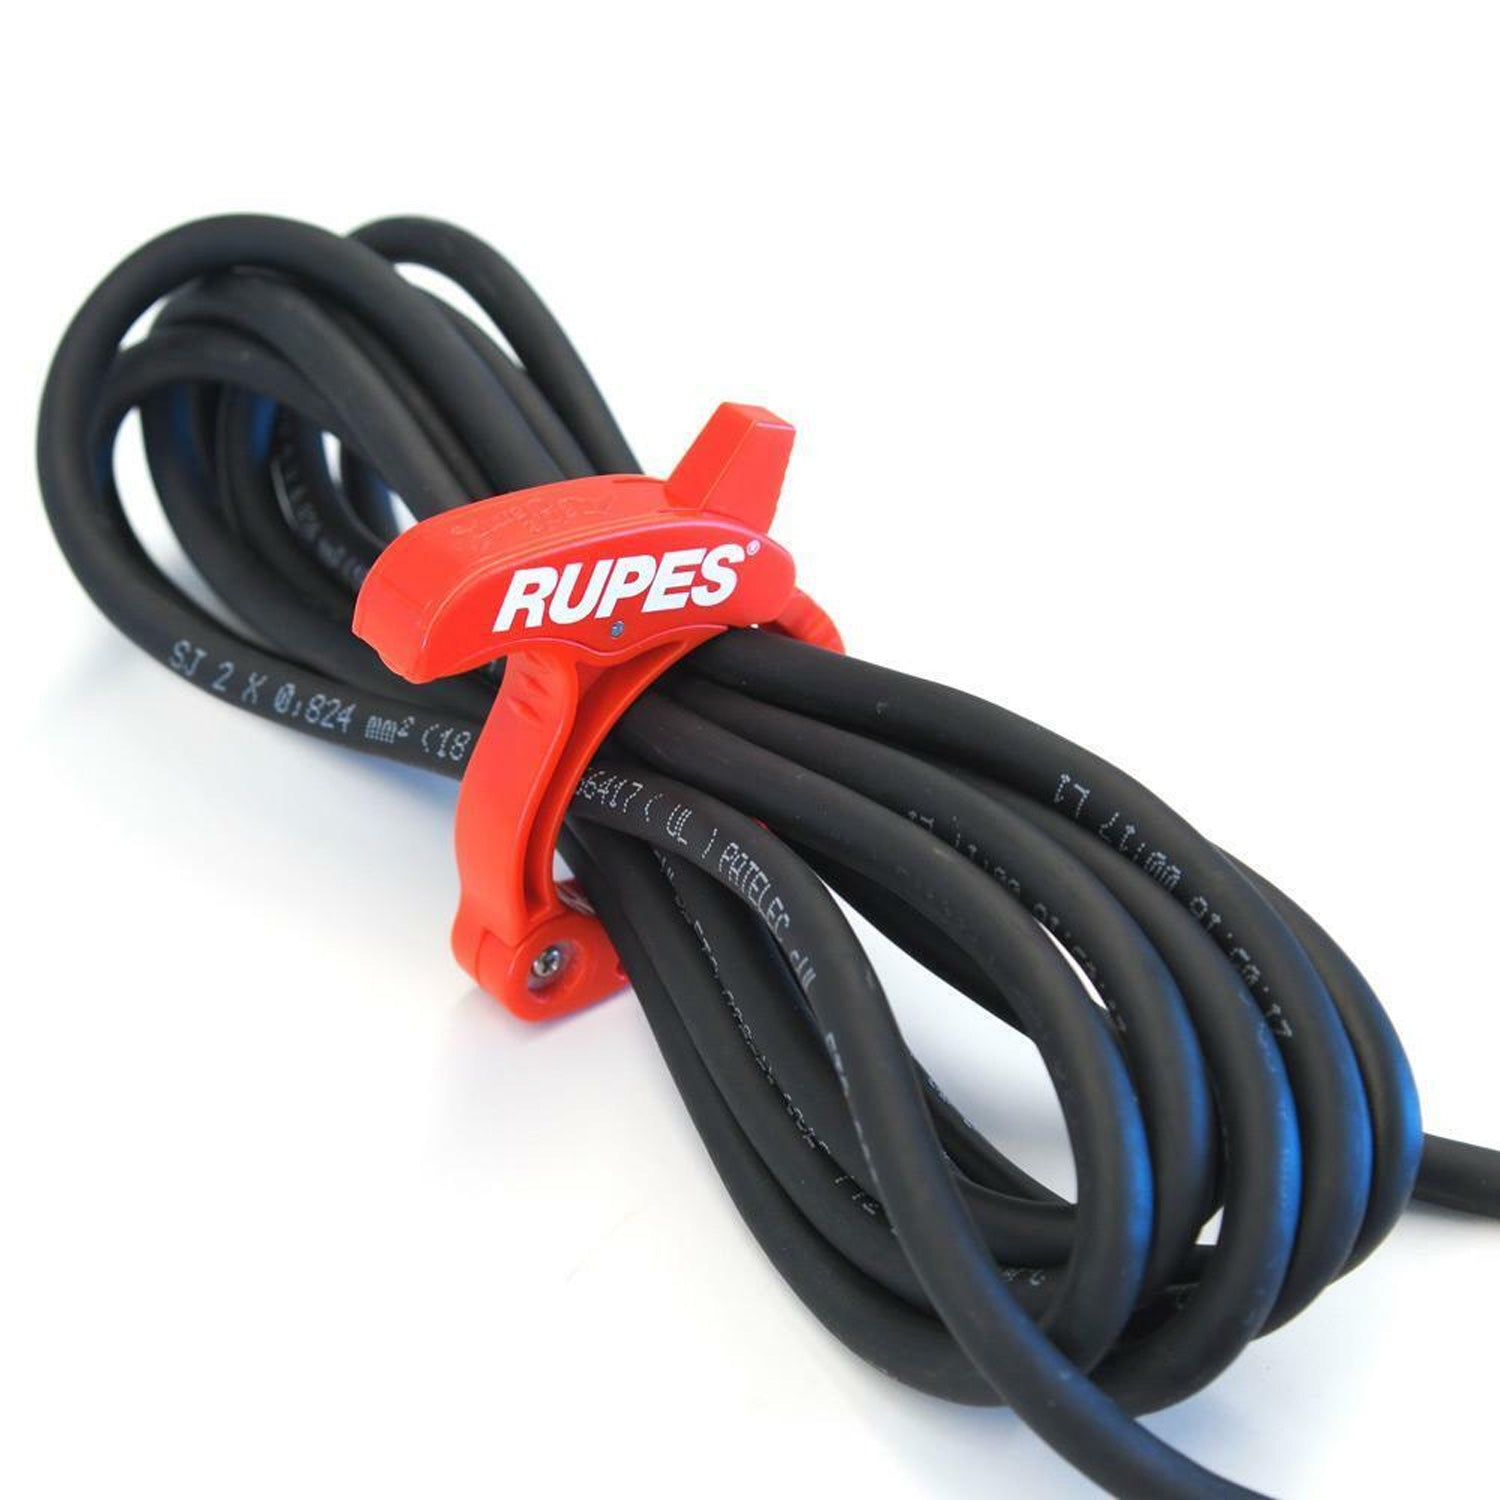 rupes-cord-management-clamp-in-use